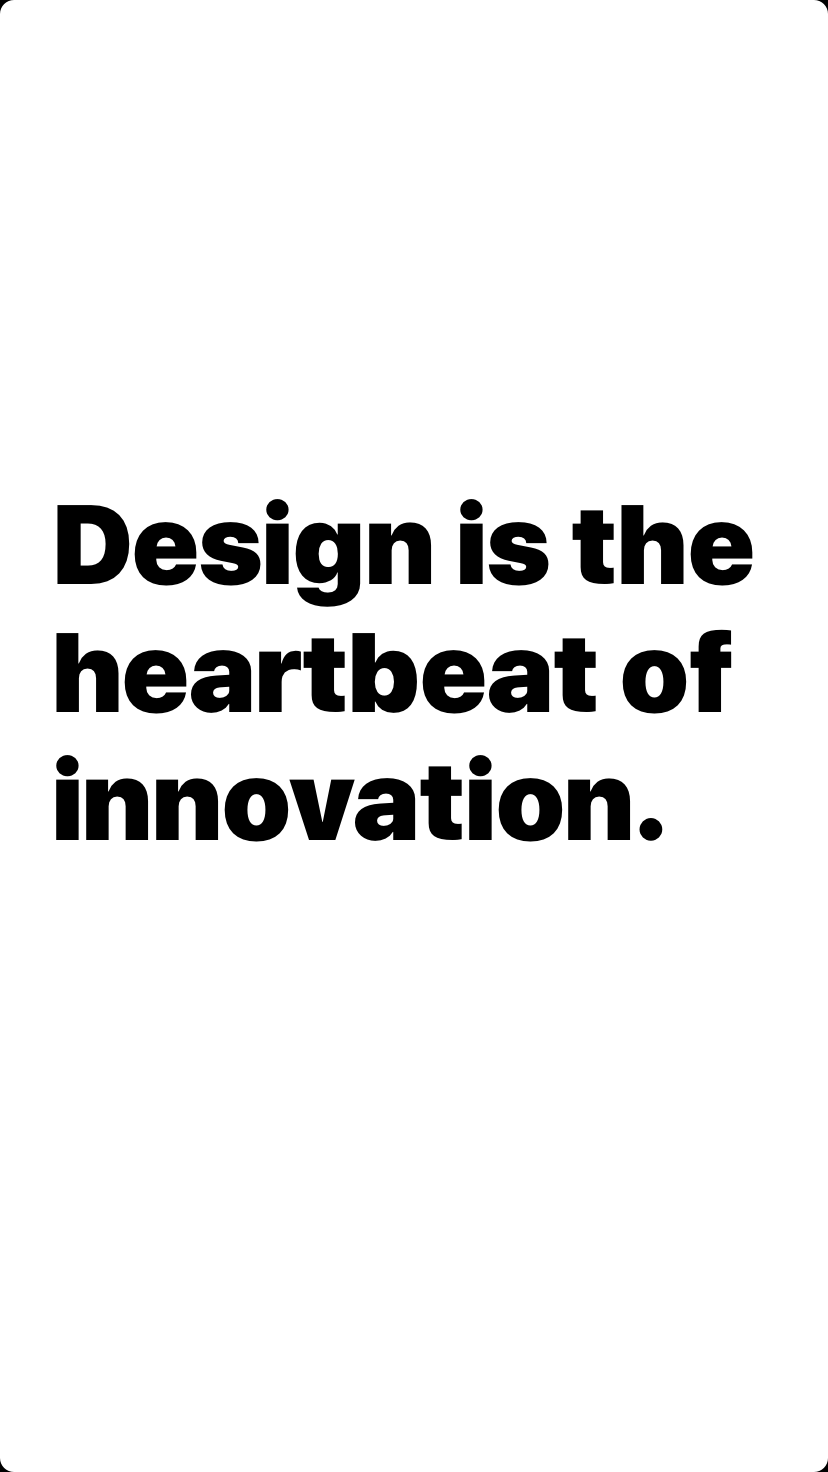 Design is the heartbeat of innovation.